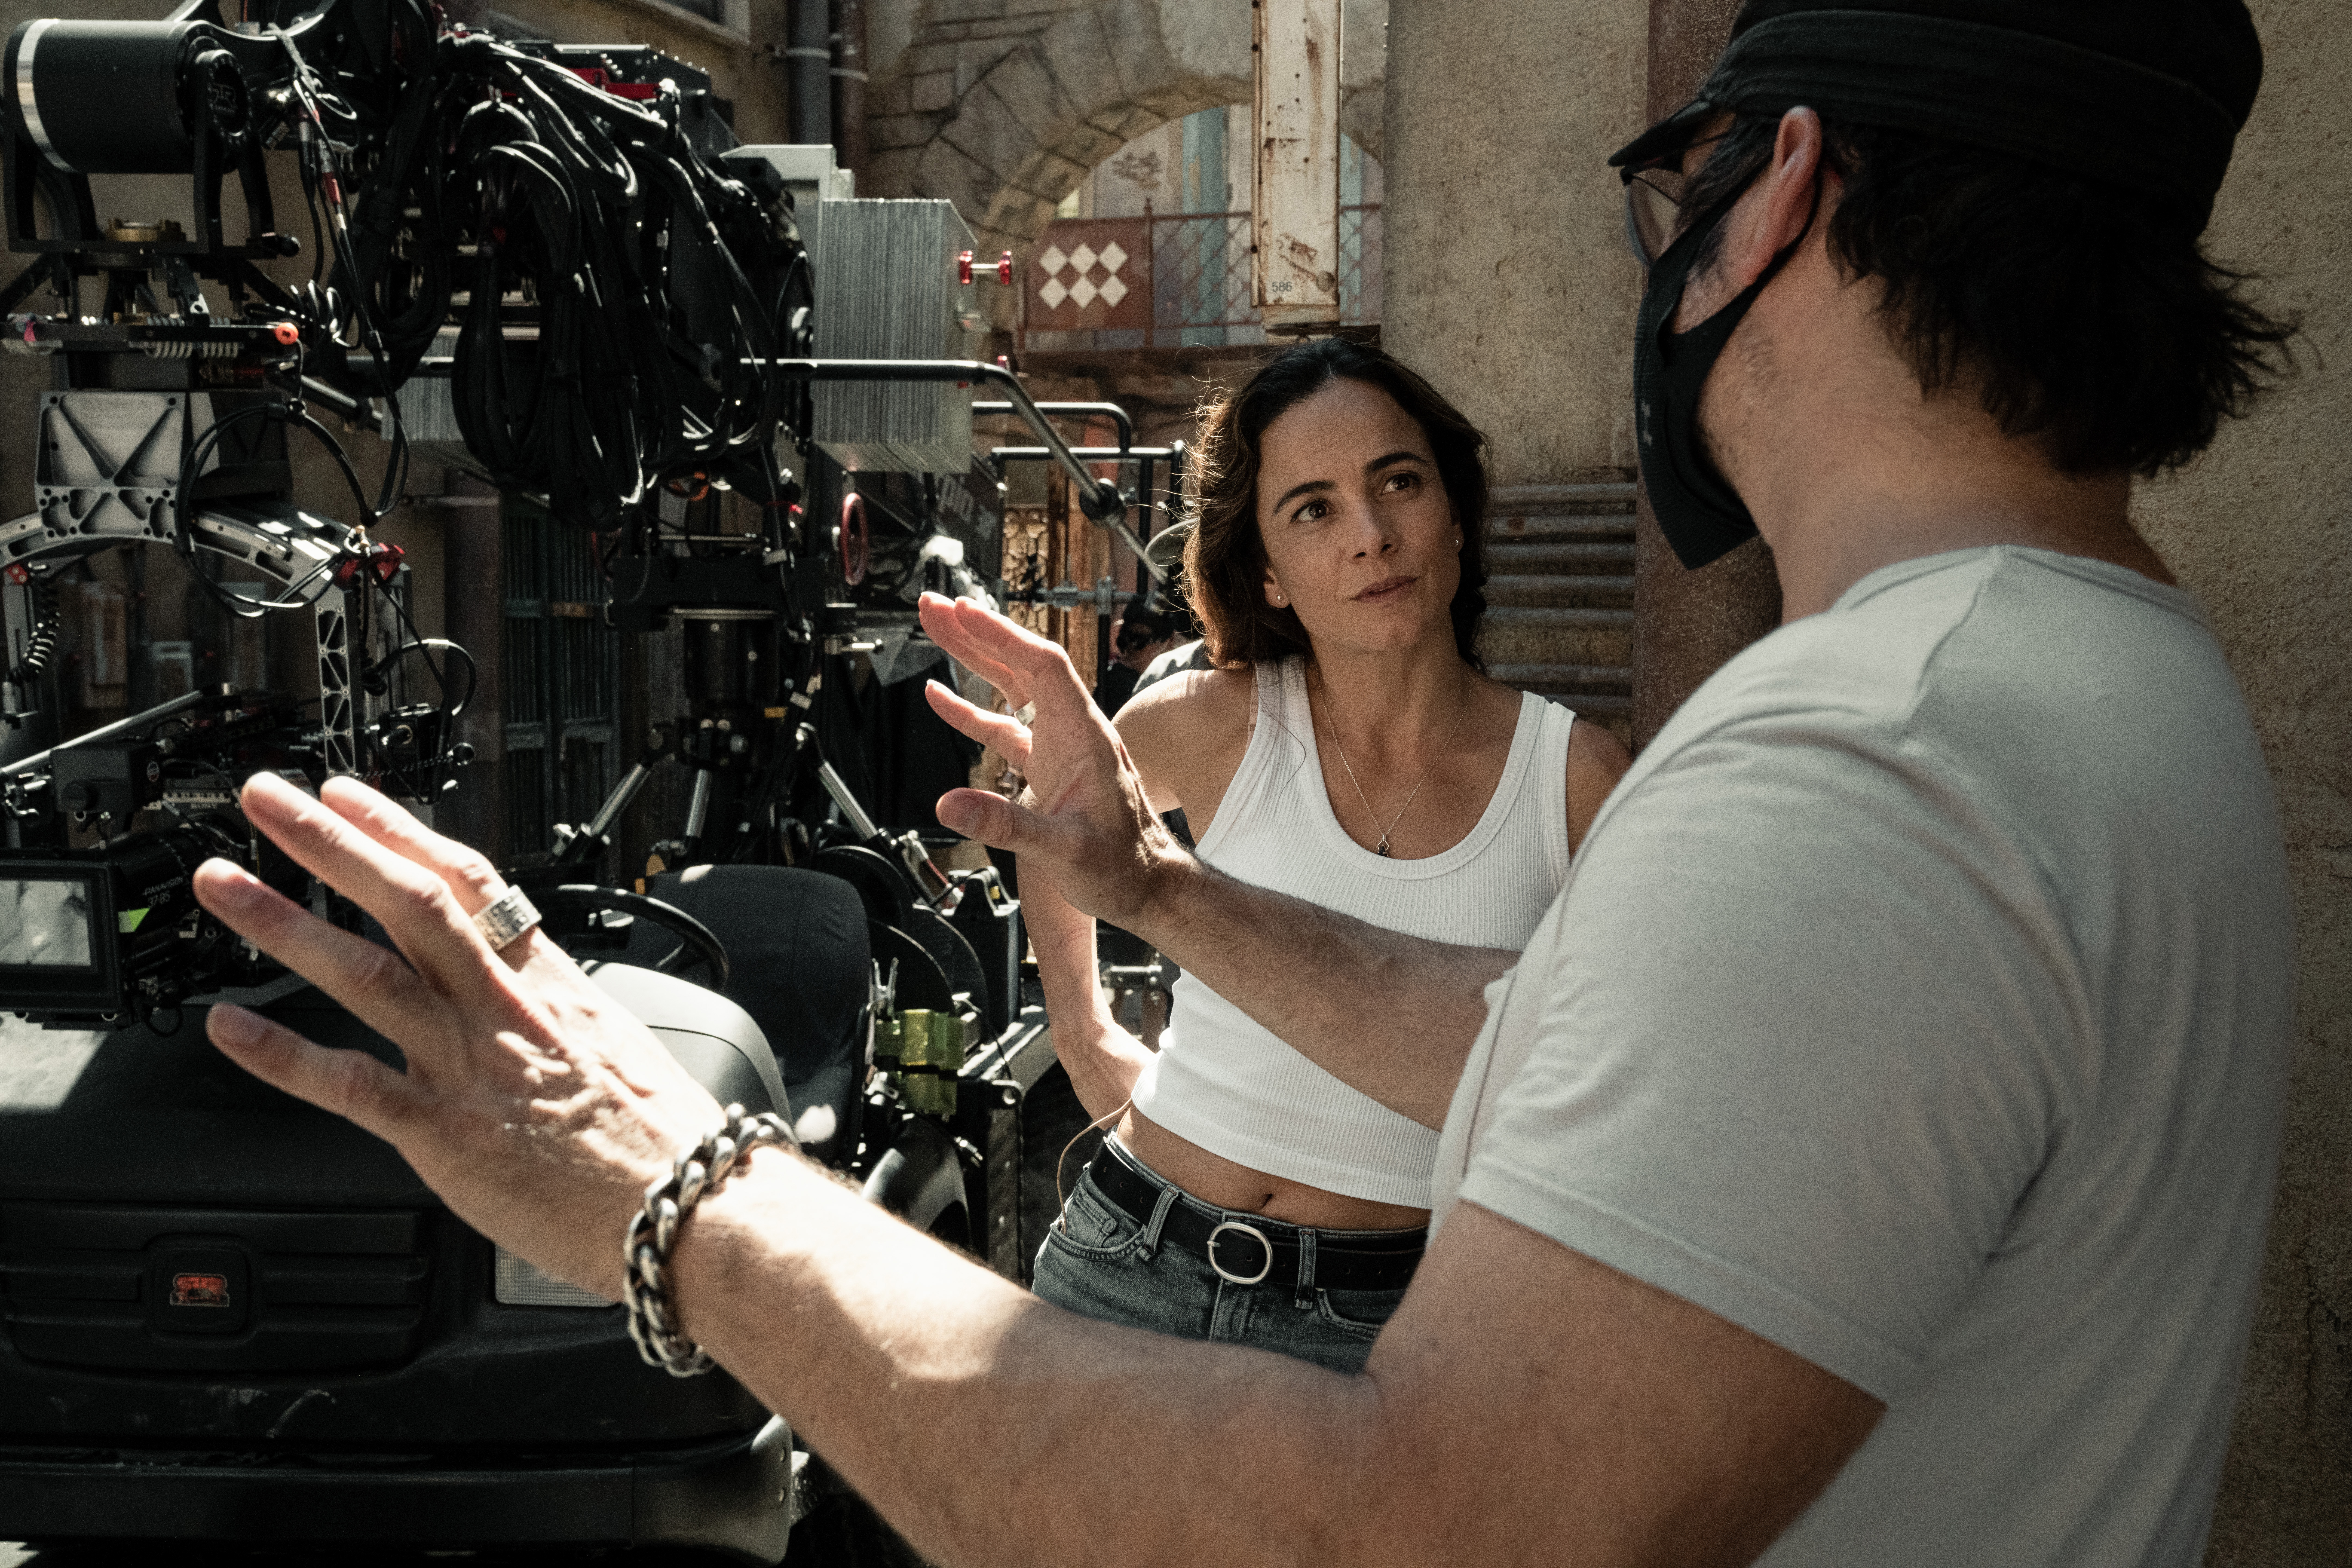 Hypnotic | Alice Braga Gives Her Thoughts On Robert Rodriguez’s Latest Passion Project | Exclusive